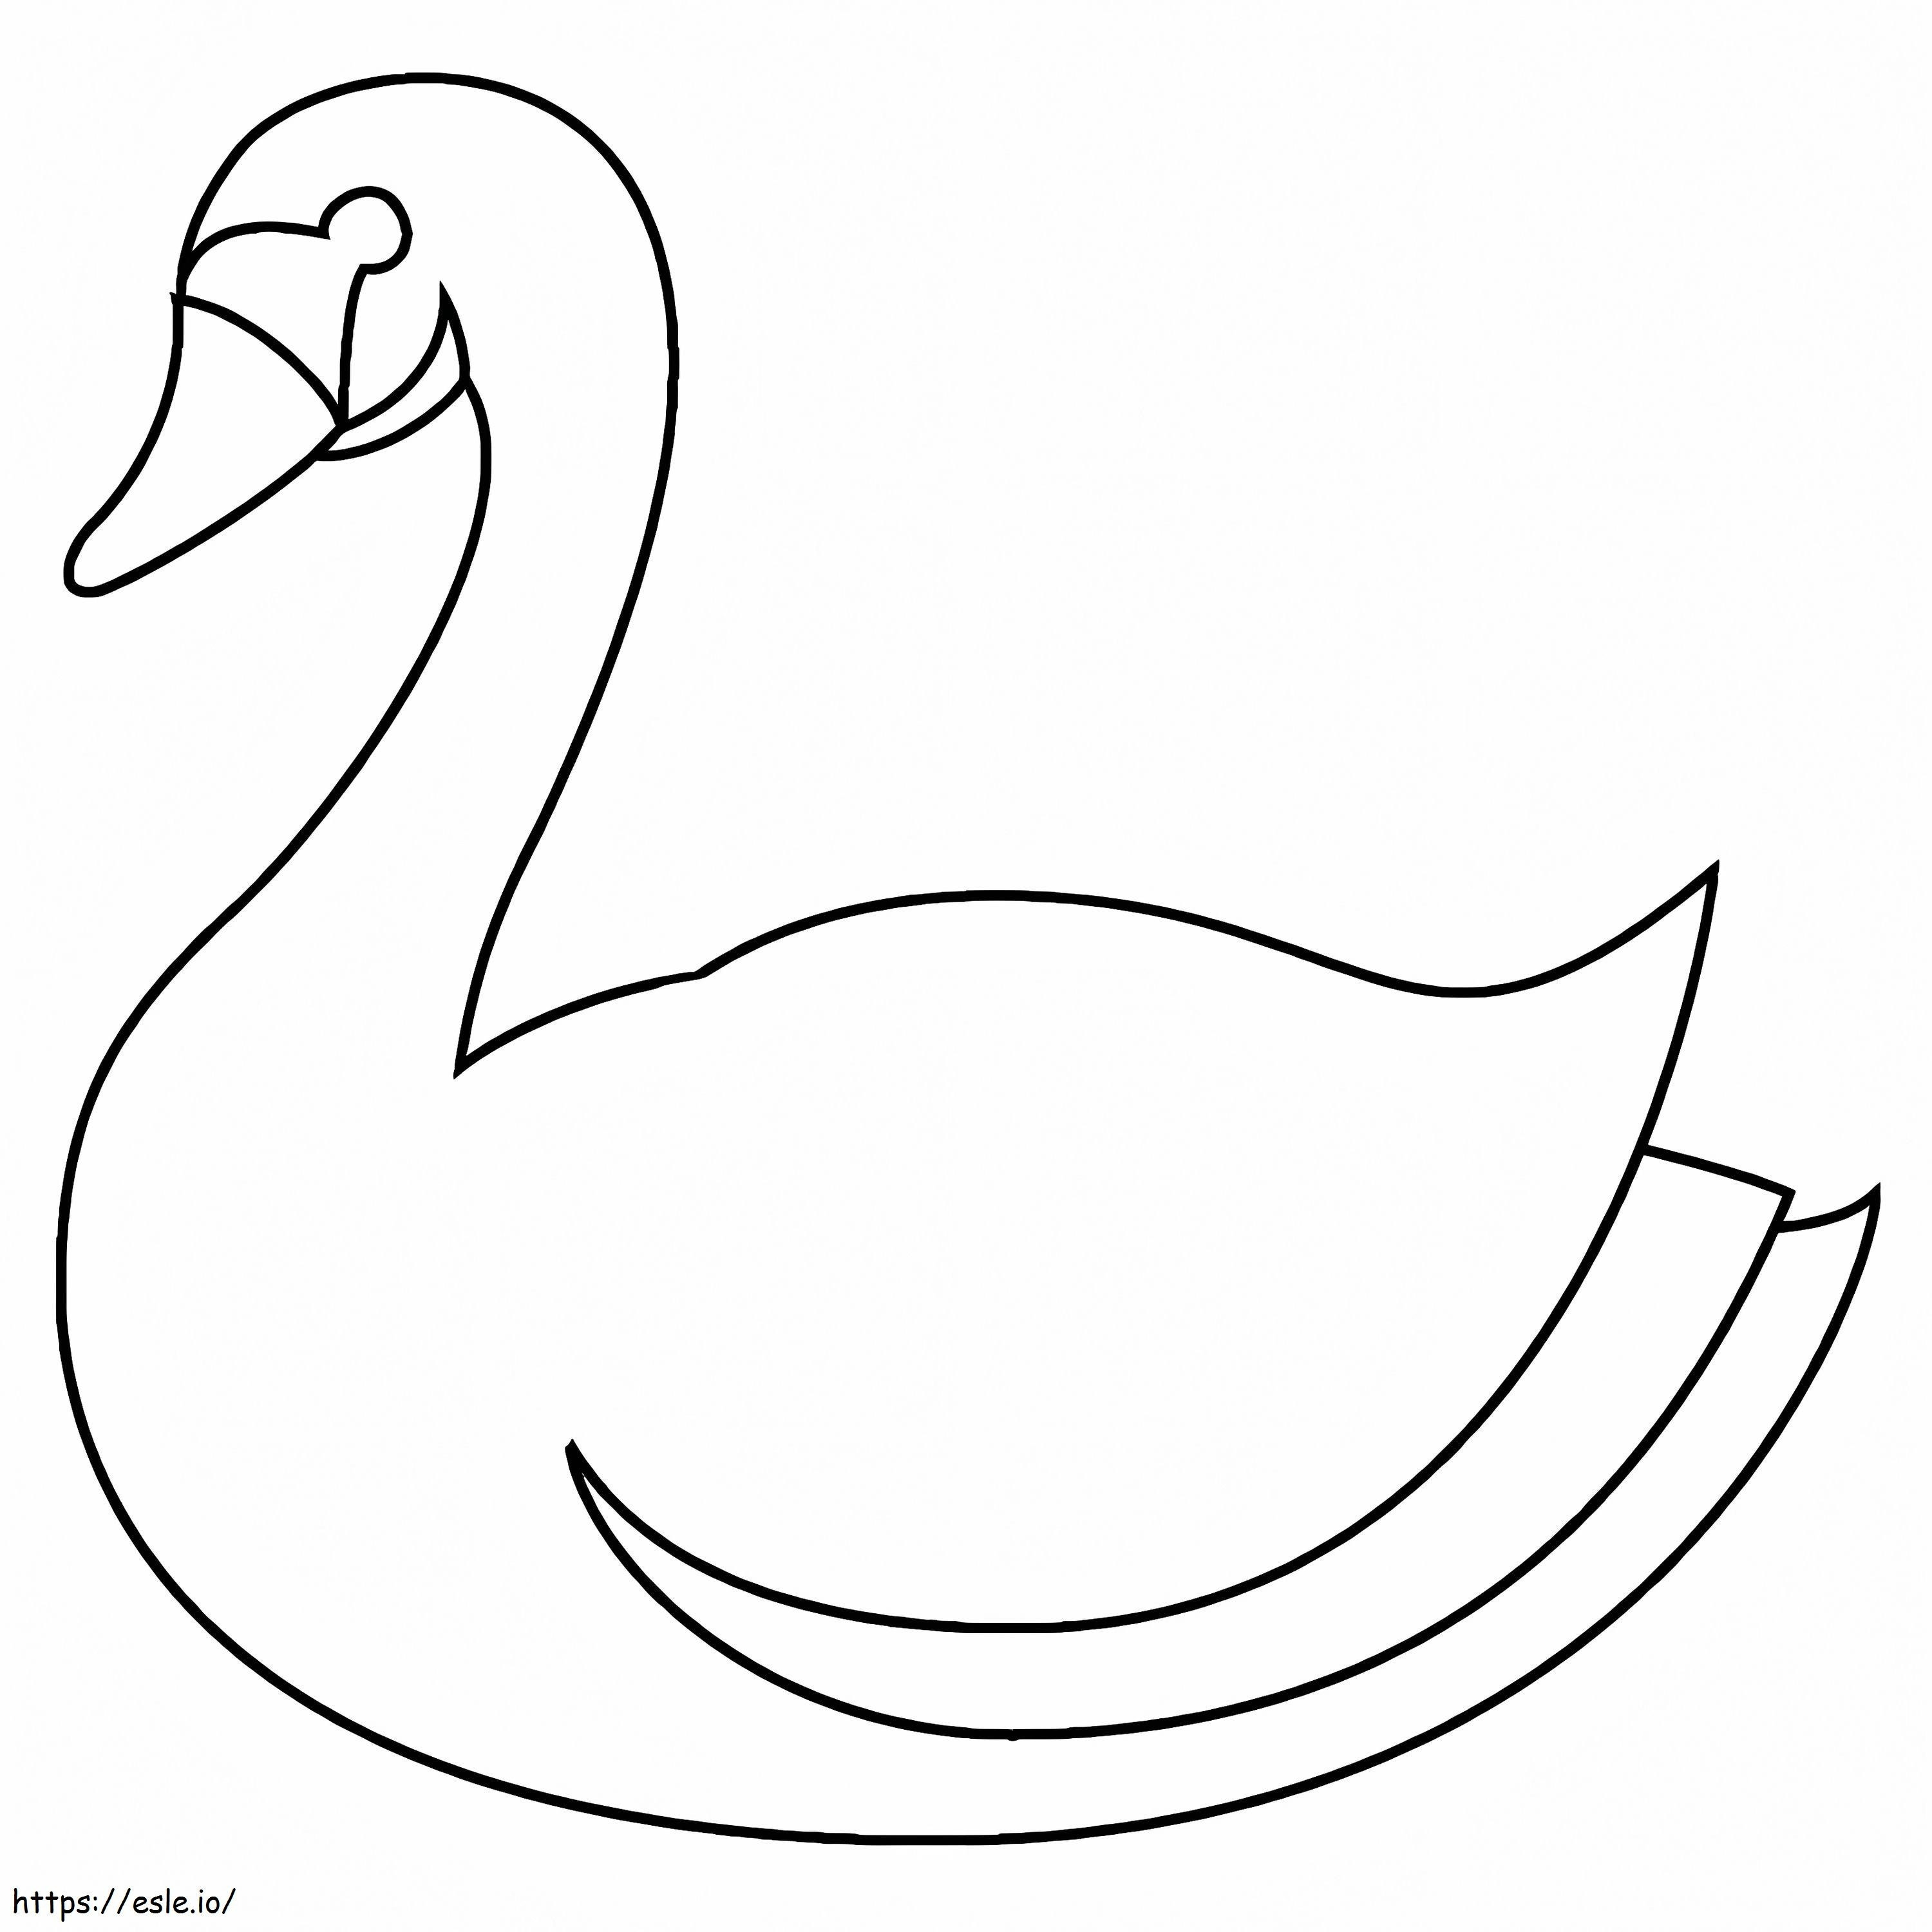 Easy Swan coloring page